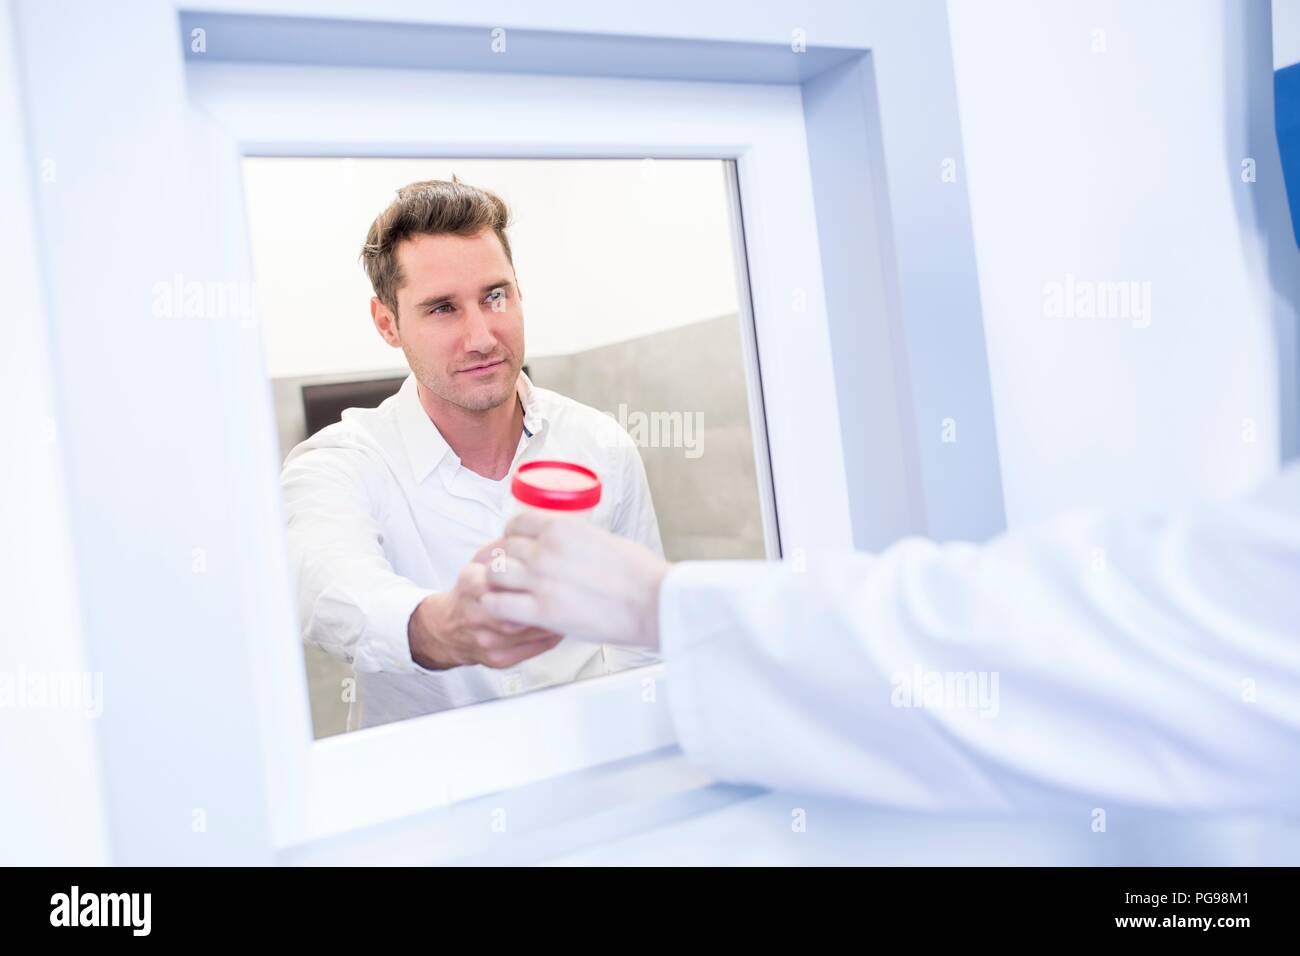 Sperm sample being handled in a fertility clinic. Stock Photo